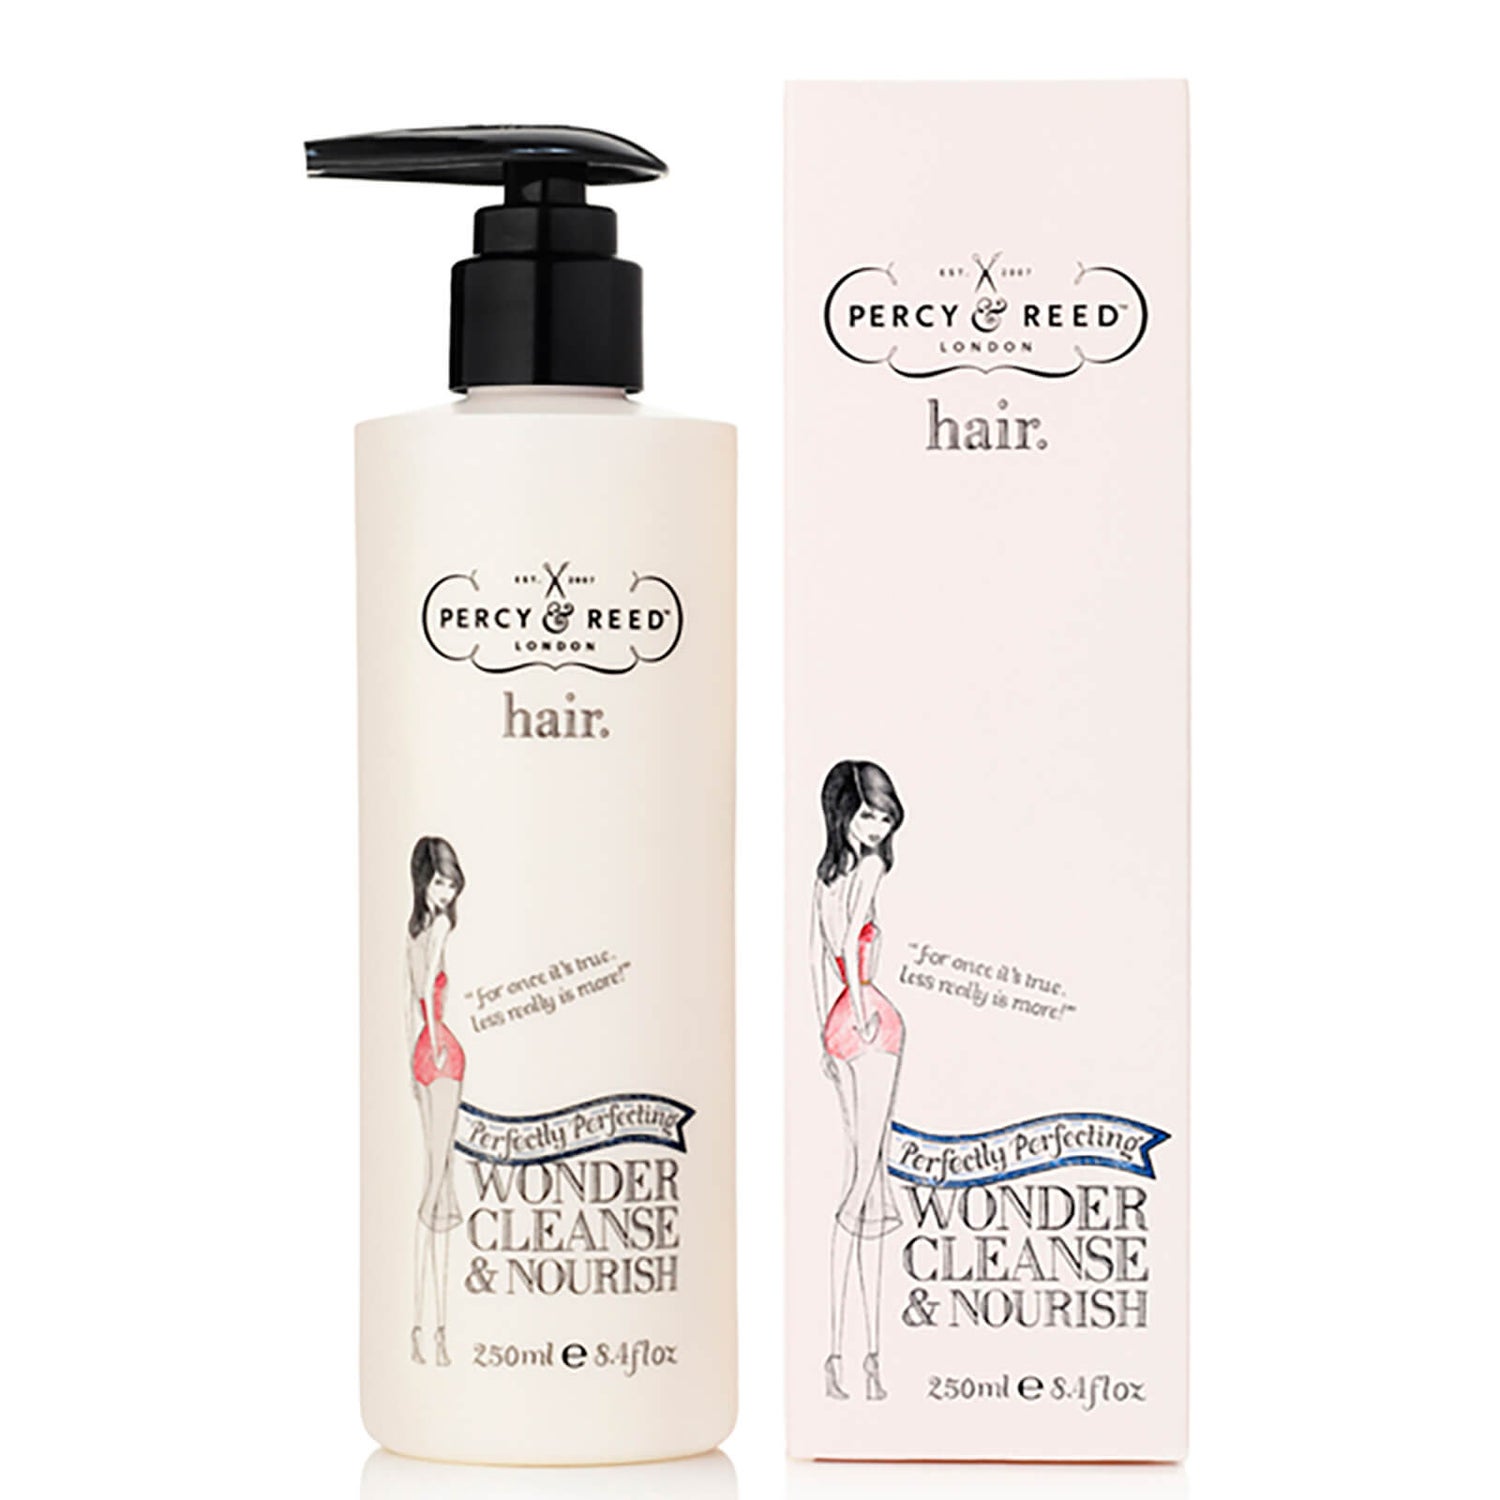 Percy & Reed Perfectly Perfecting Wonder Cleanse & Nourish Conditioner 250ml